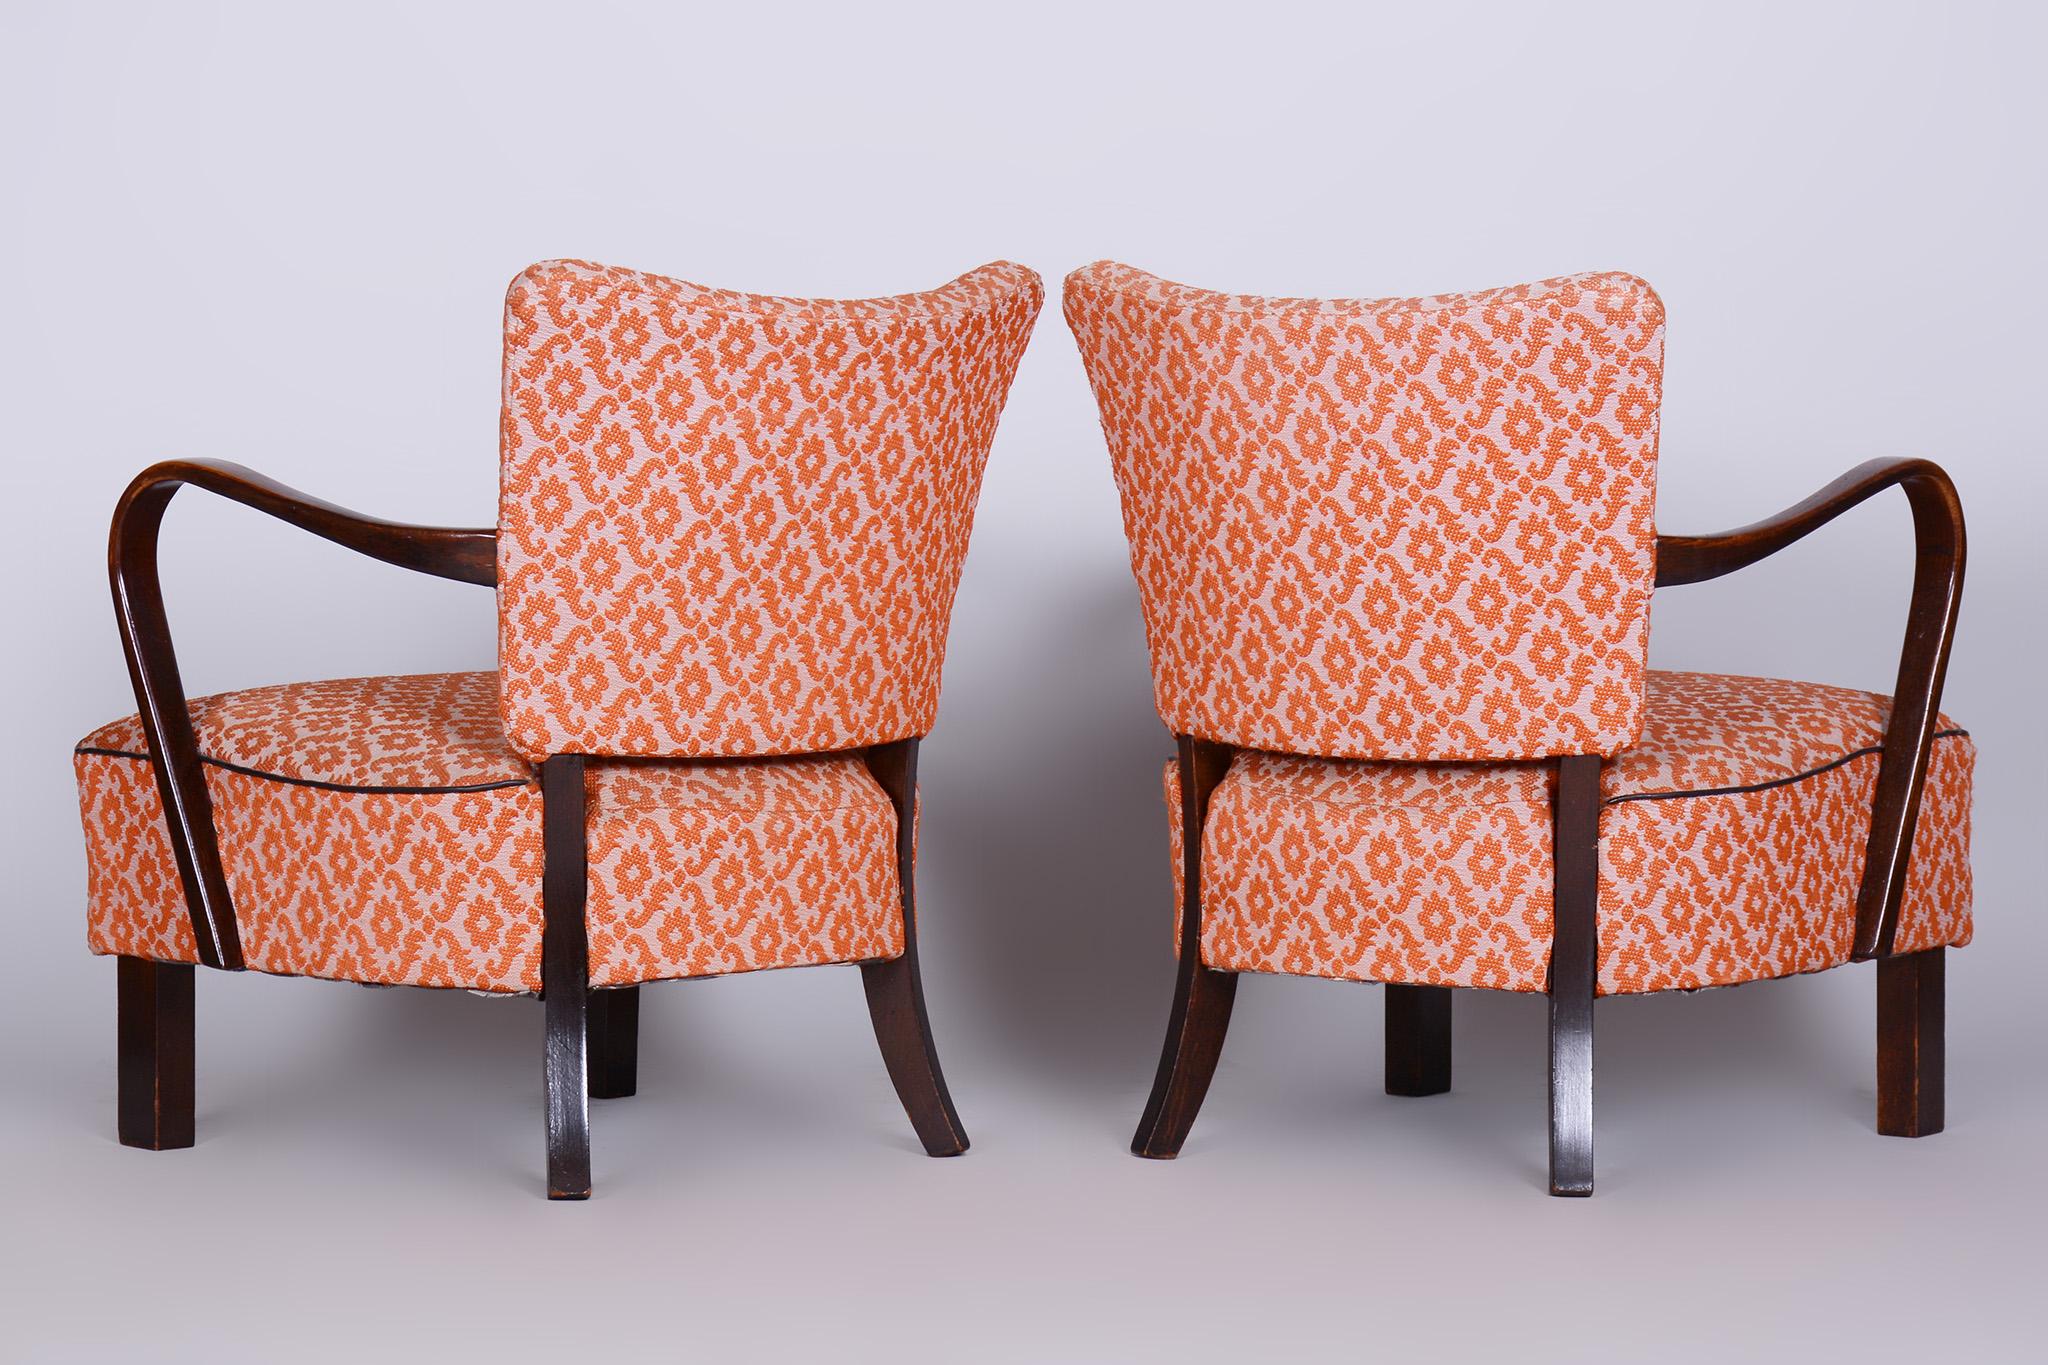 Pair of Beech Art Deco Armchairs Made in 1930s, Czechia, Revived Polish For Sale 2